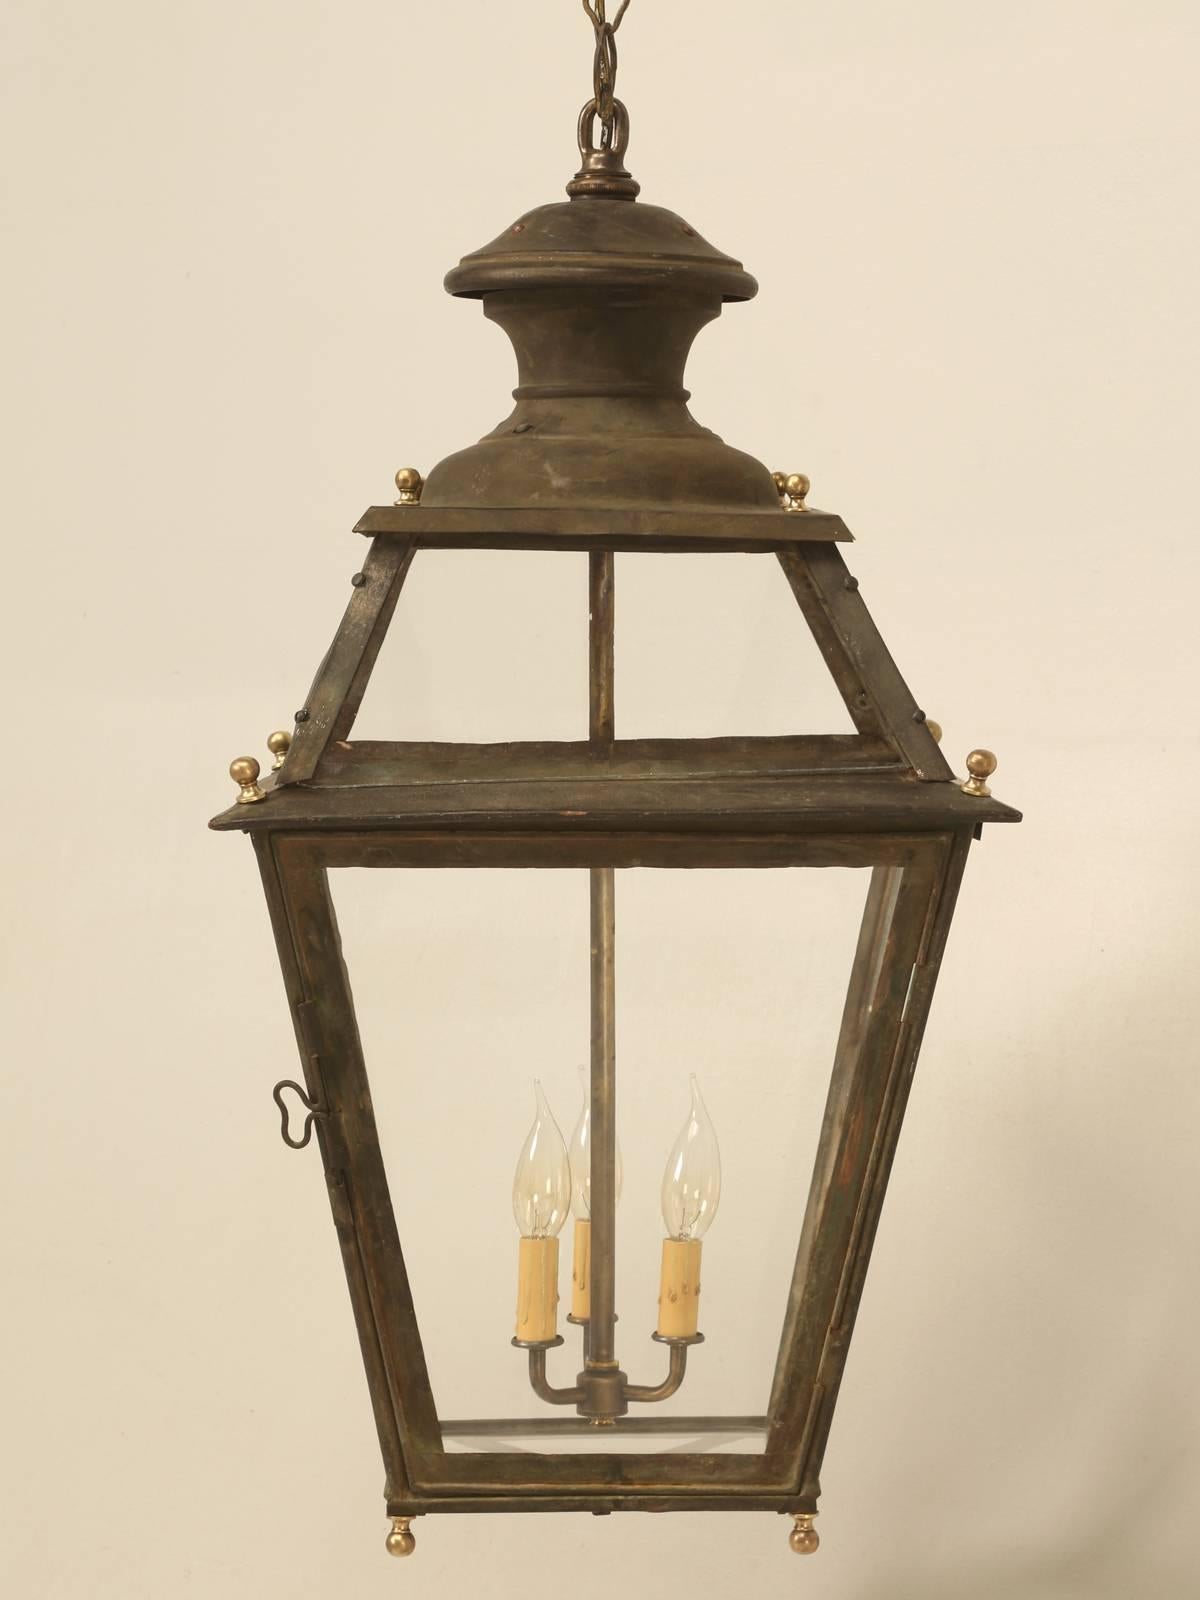 Antique French hanging copper lantern with a spectacular patina that no one could fake this good. We rewired the lantern and installed the original handmade wavy French glass for the perfect look. Will accept (three) 60 watt bulbs. 

Comes with a